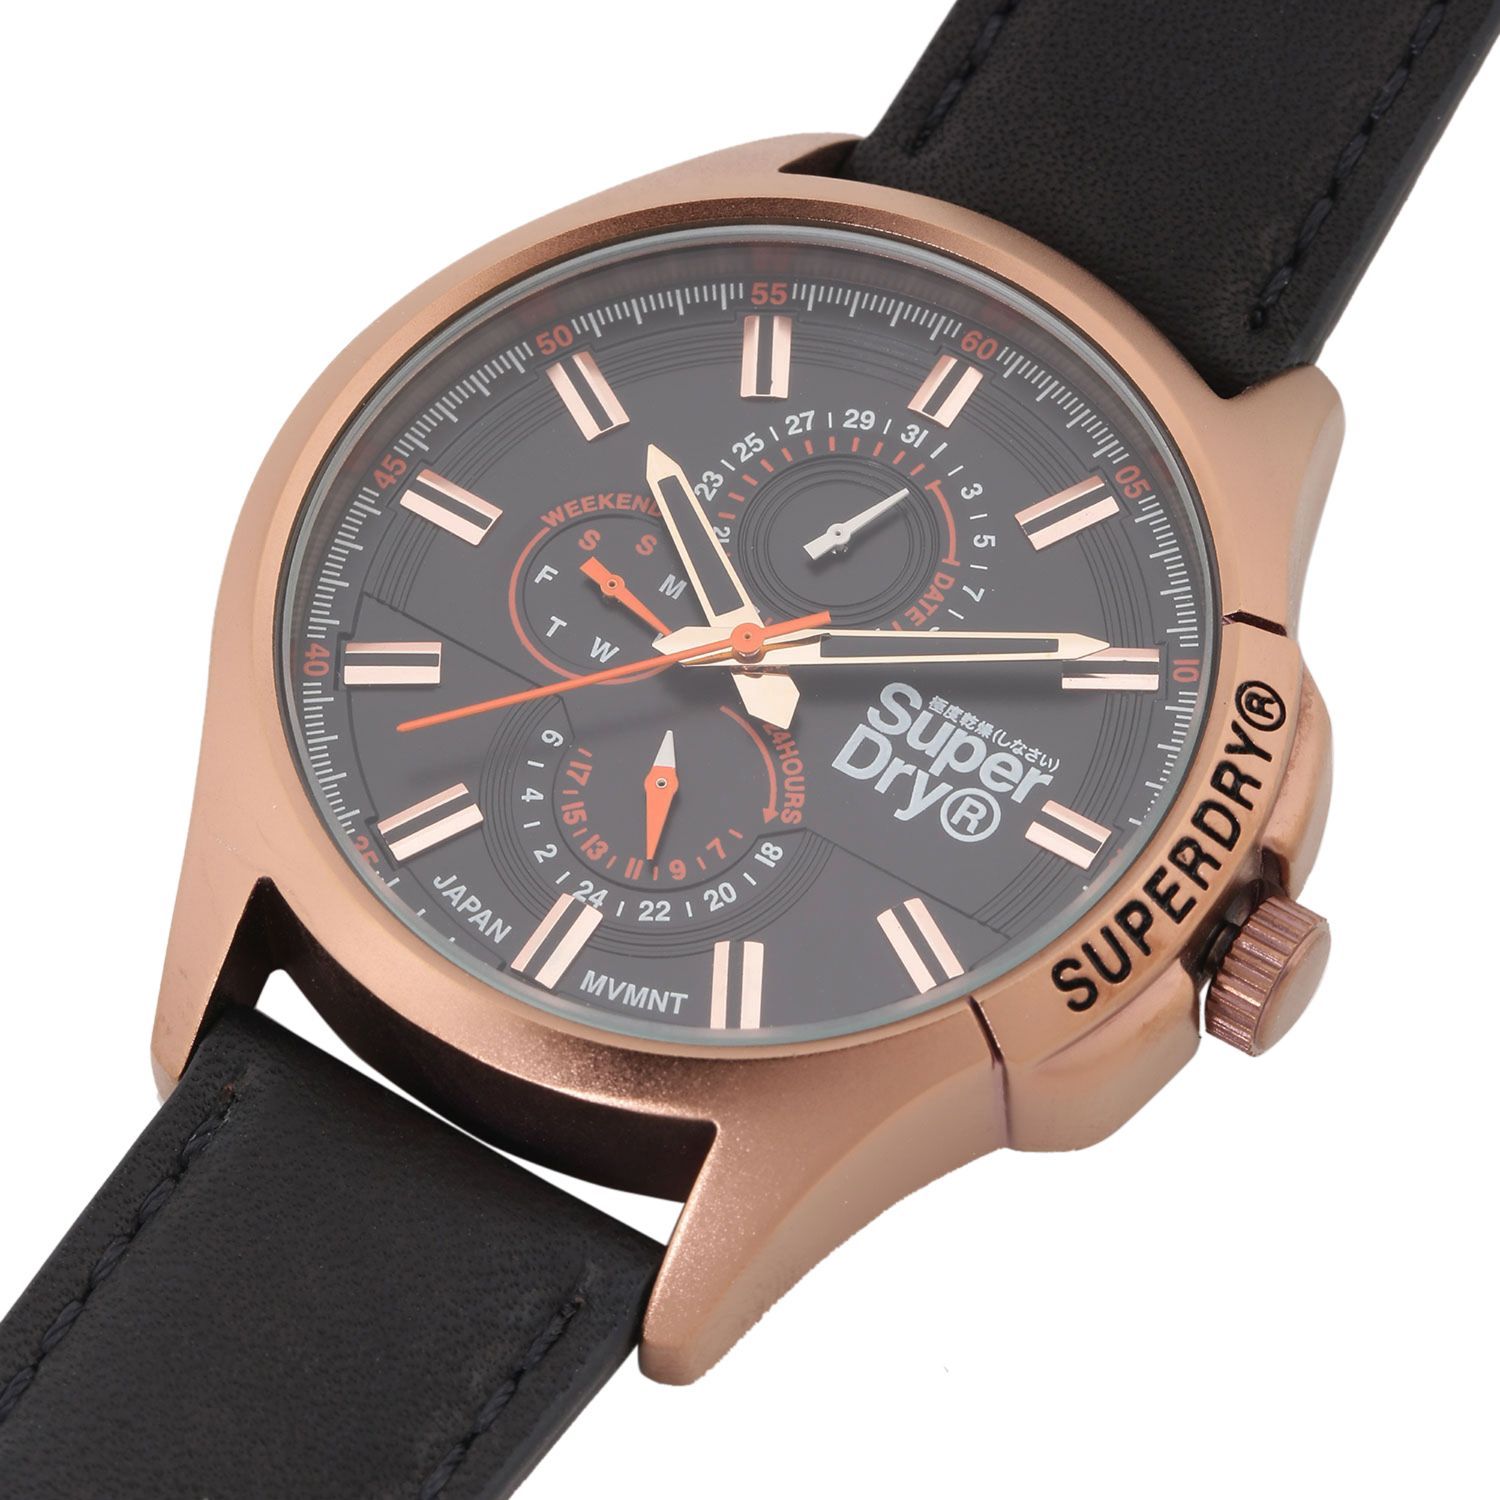 Fossil Q Marshal 4896 (DW2a)watch. Not detected in Google Wear OS. - Wear  OS by Google Community